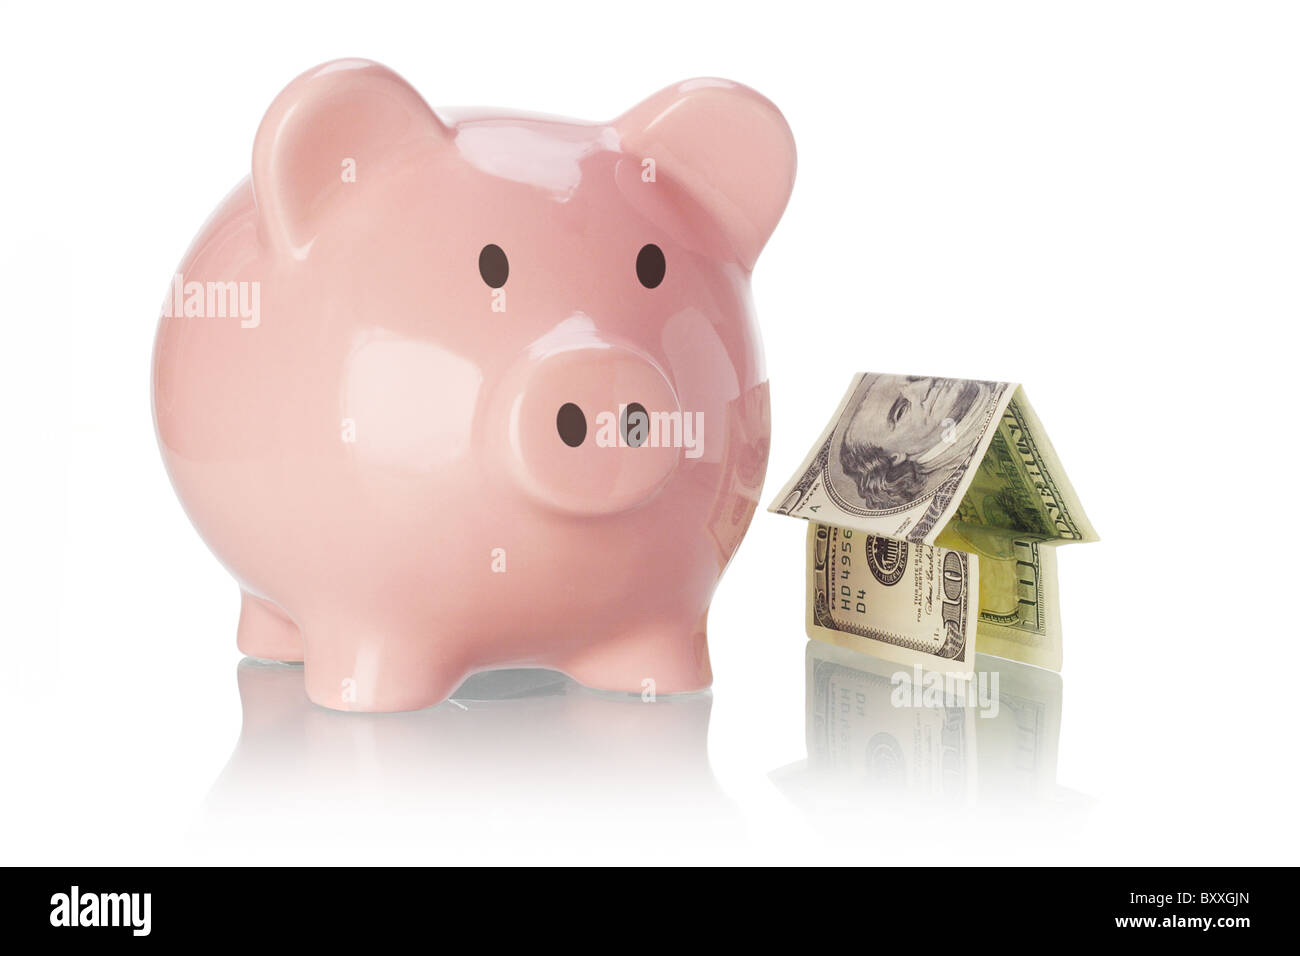 Piggy bank and money house on white backgound Stock Photo